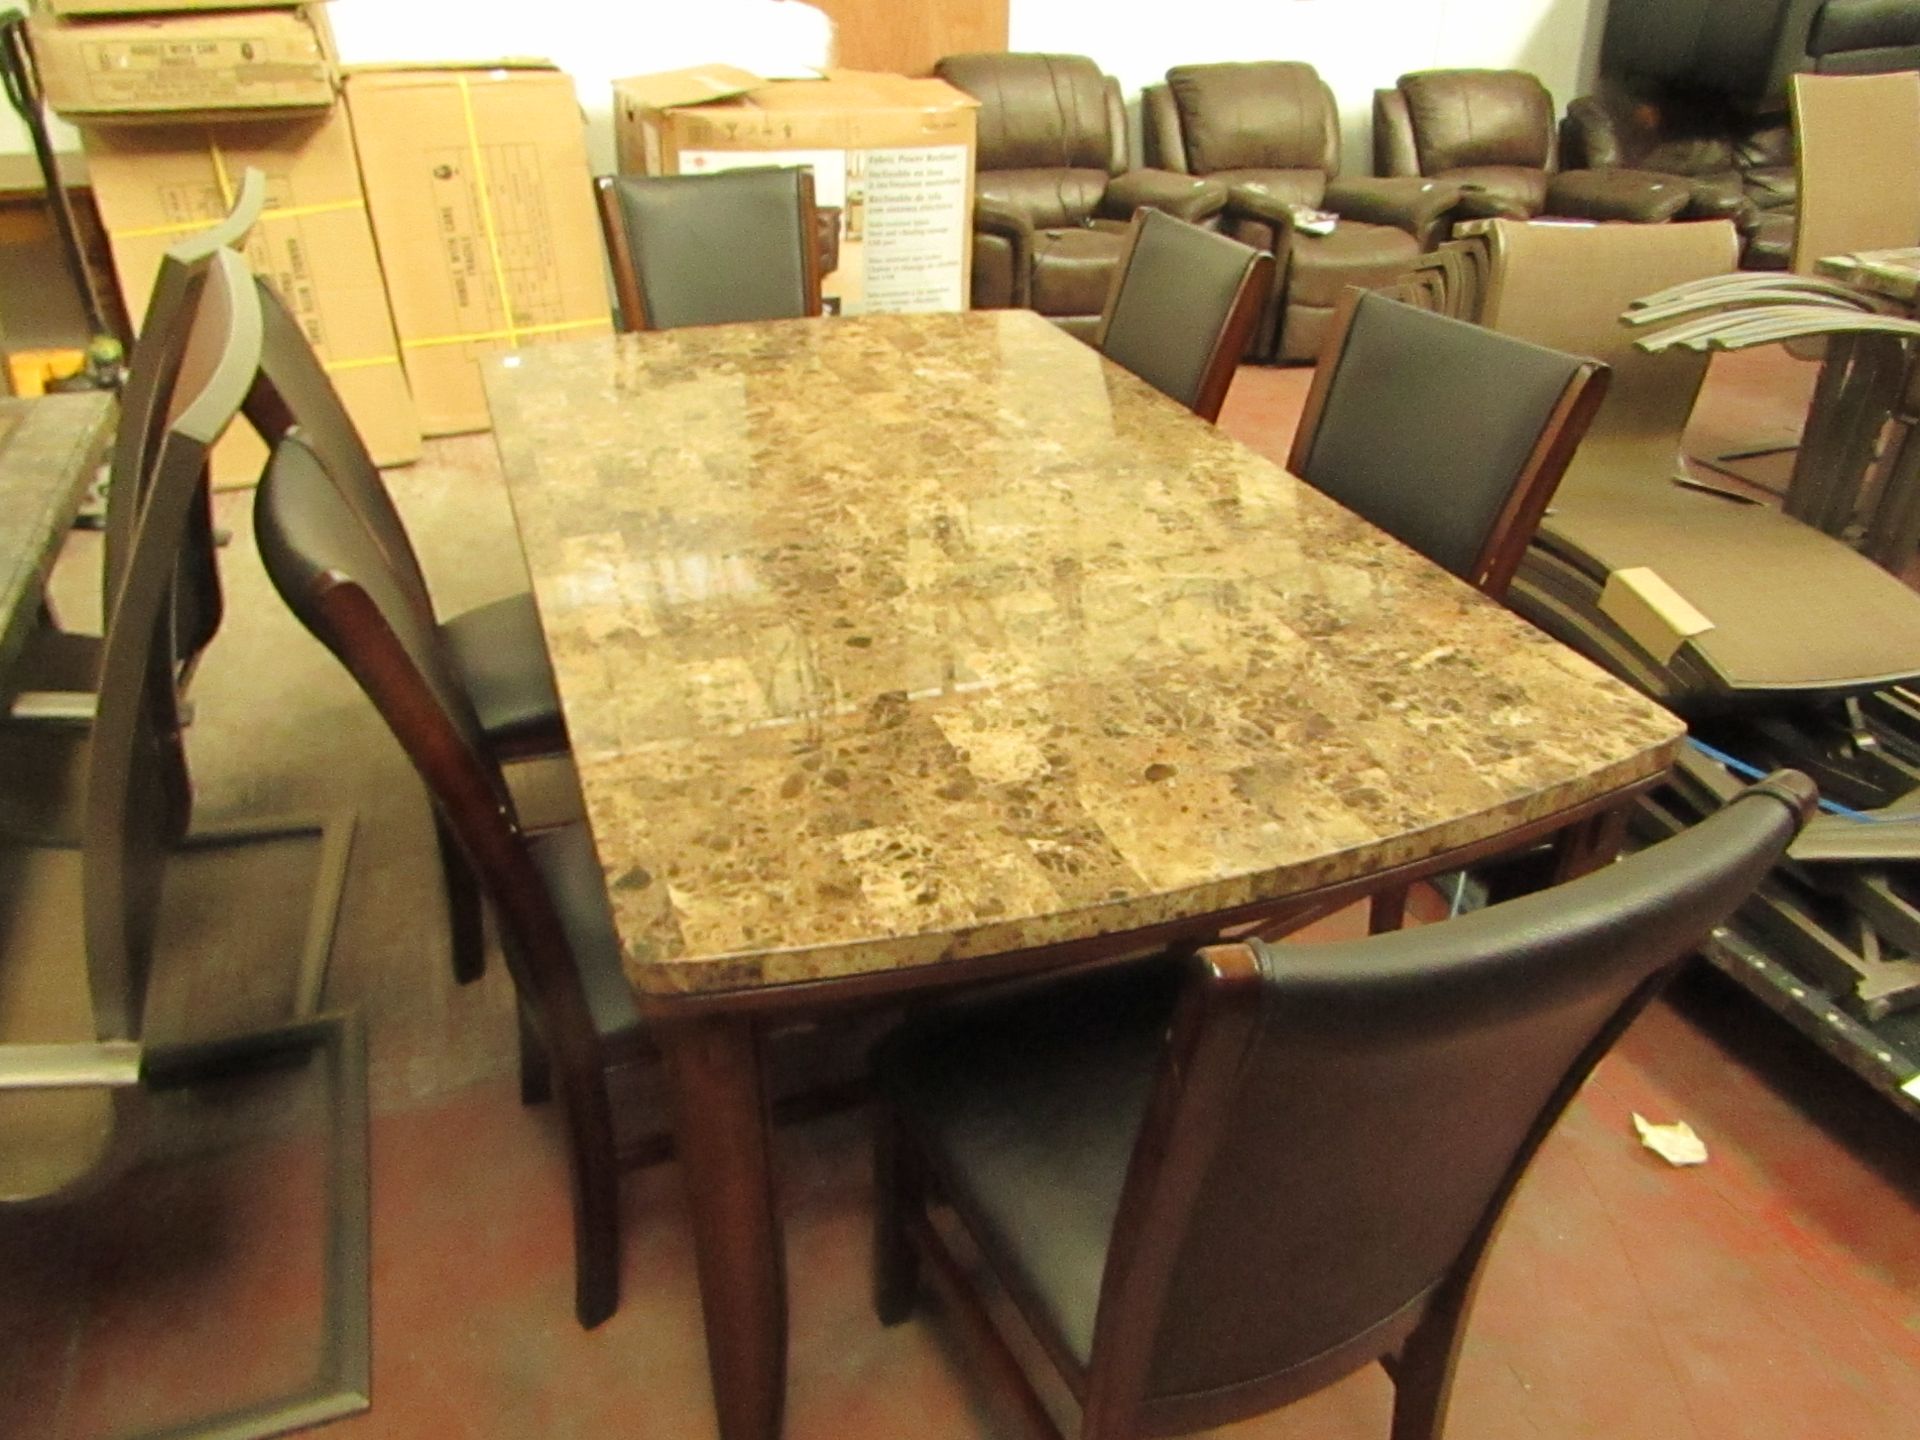 Costco Bayside furnishing stone topped dinign table with 6 dining chairs, there is damade to the